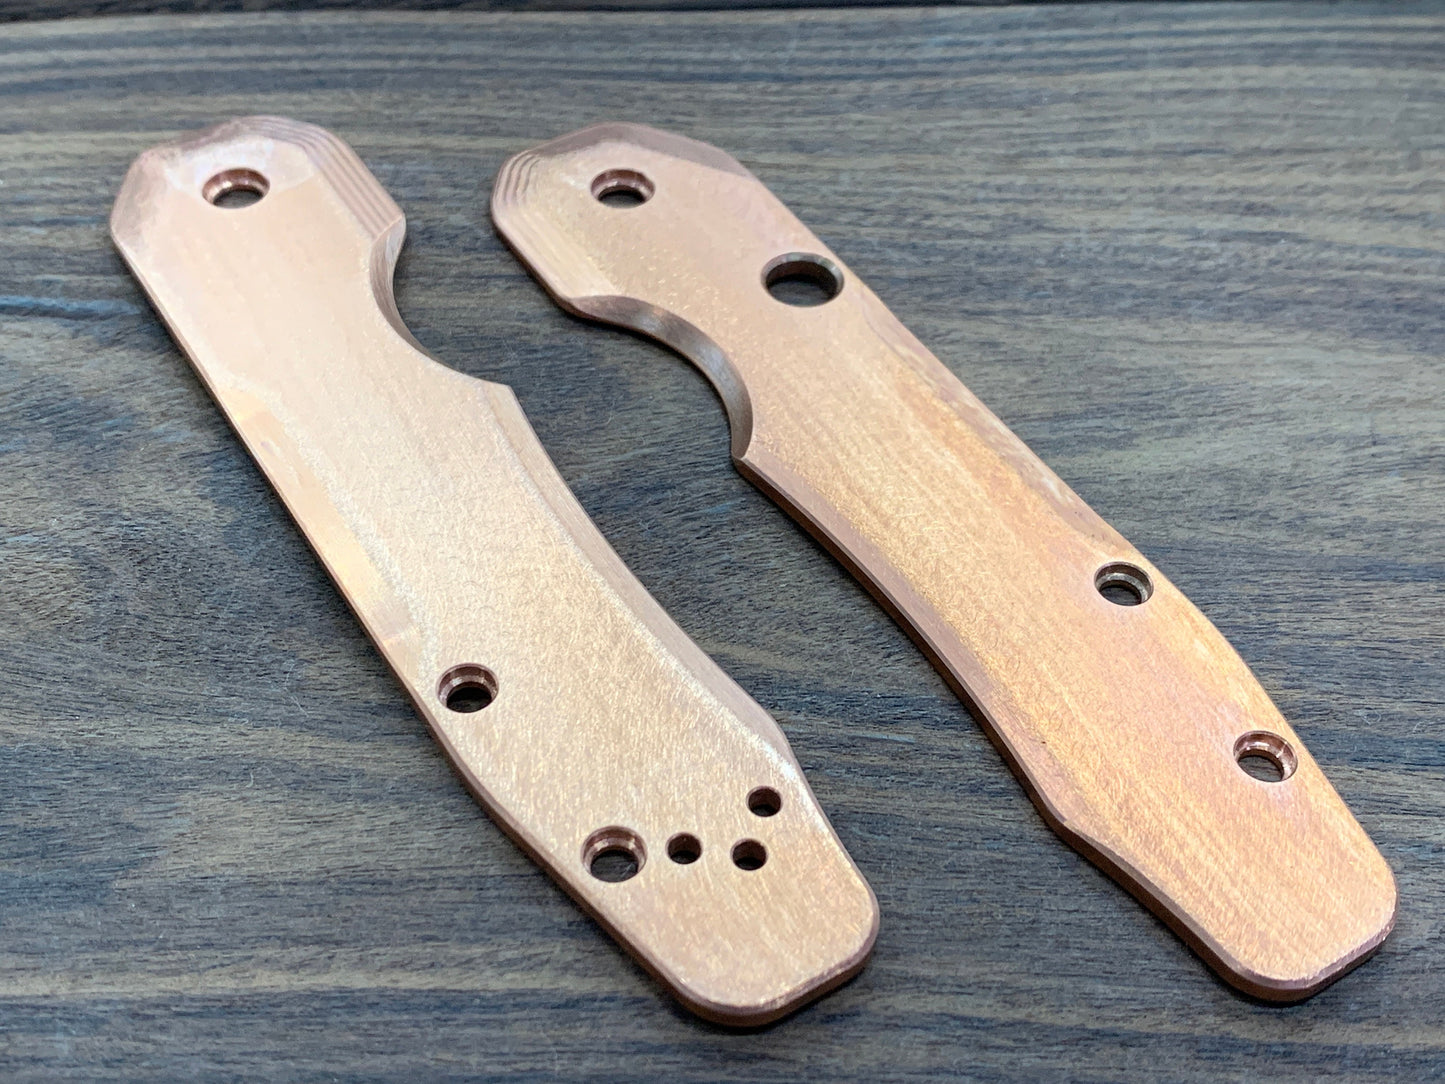 Deep BRUSHED Copper Scales for Spyderco SMOCK